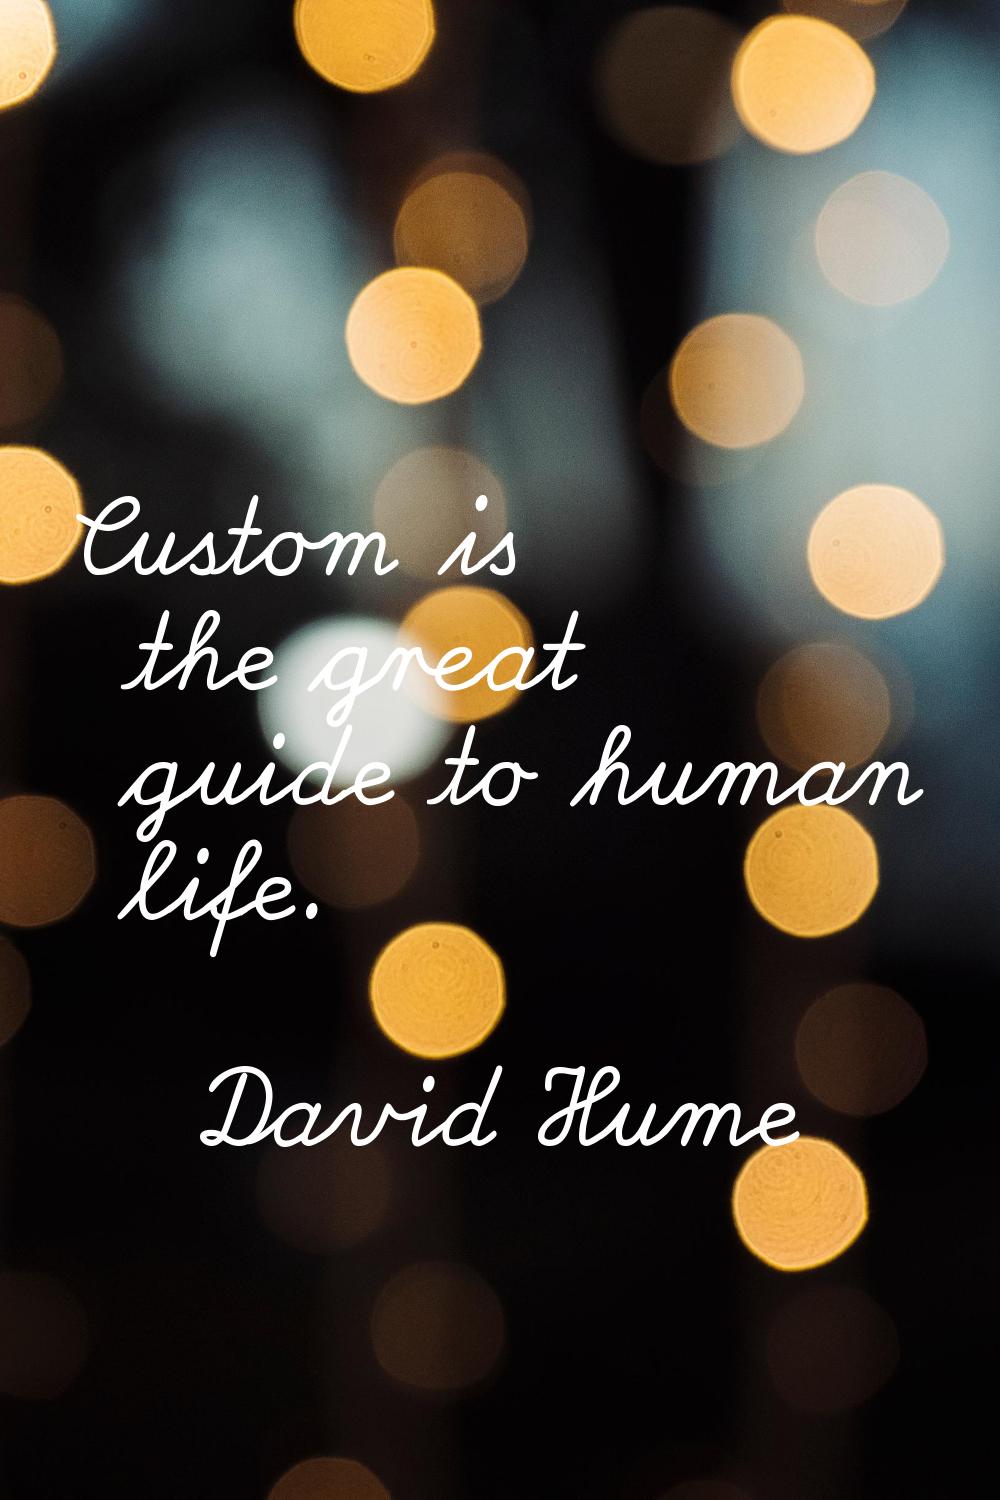 Custom is the great guide to human life.